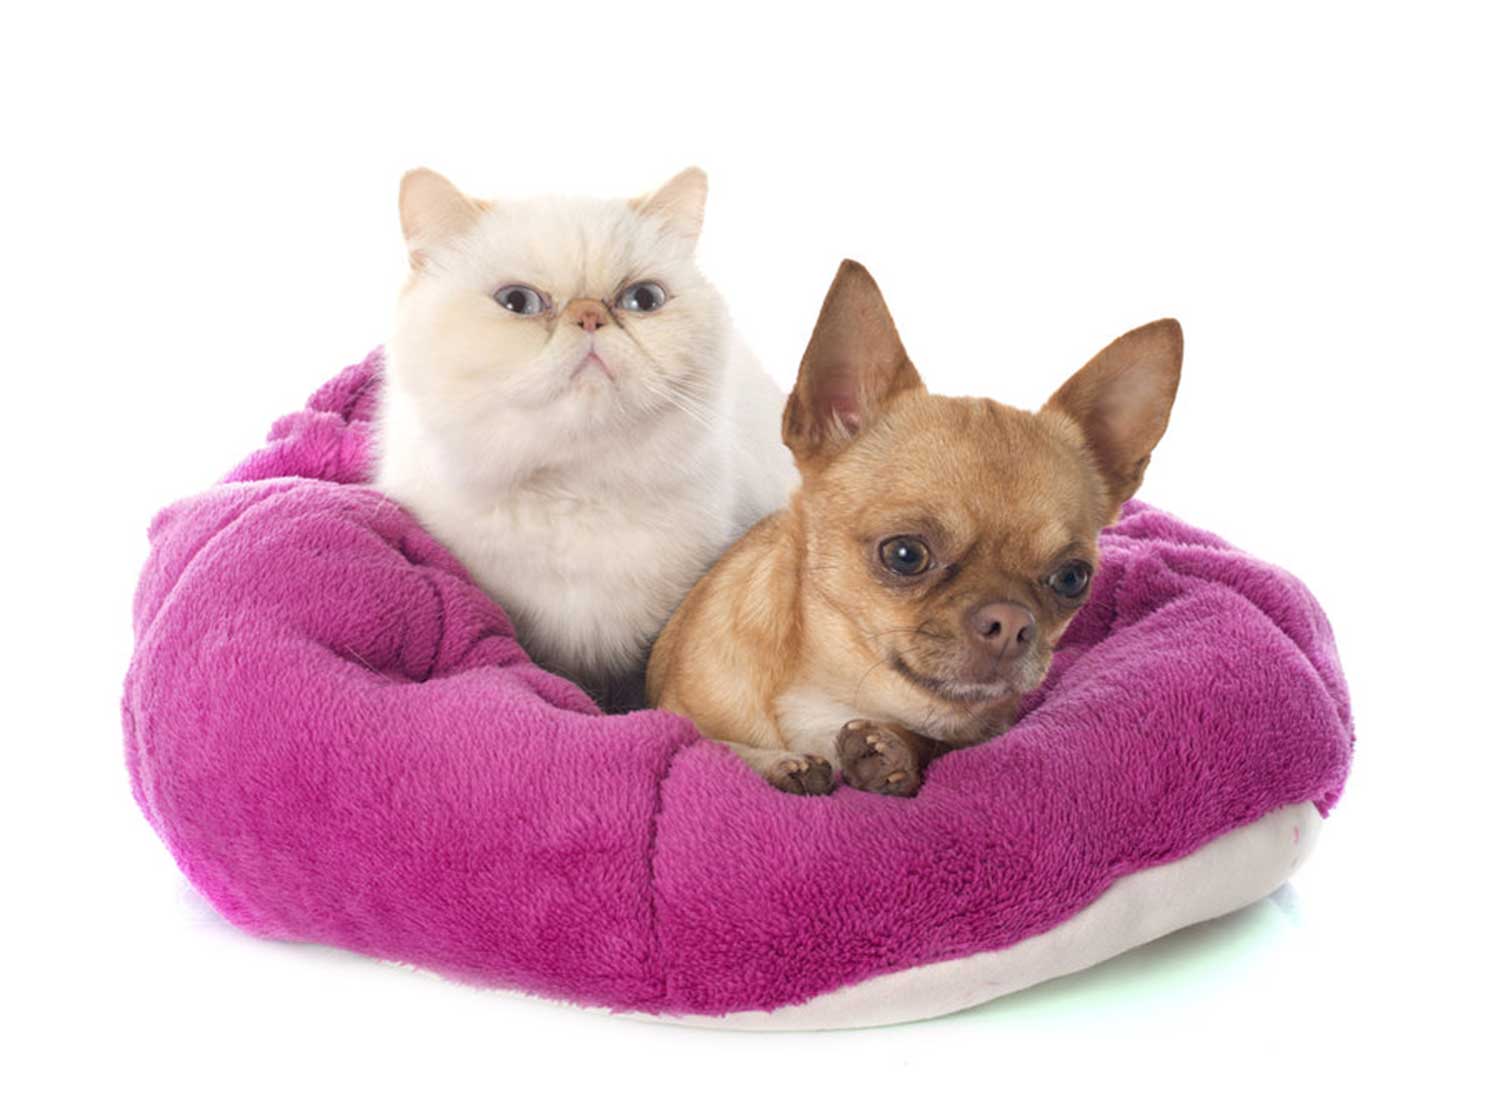 Chihuahua and a cat